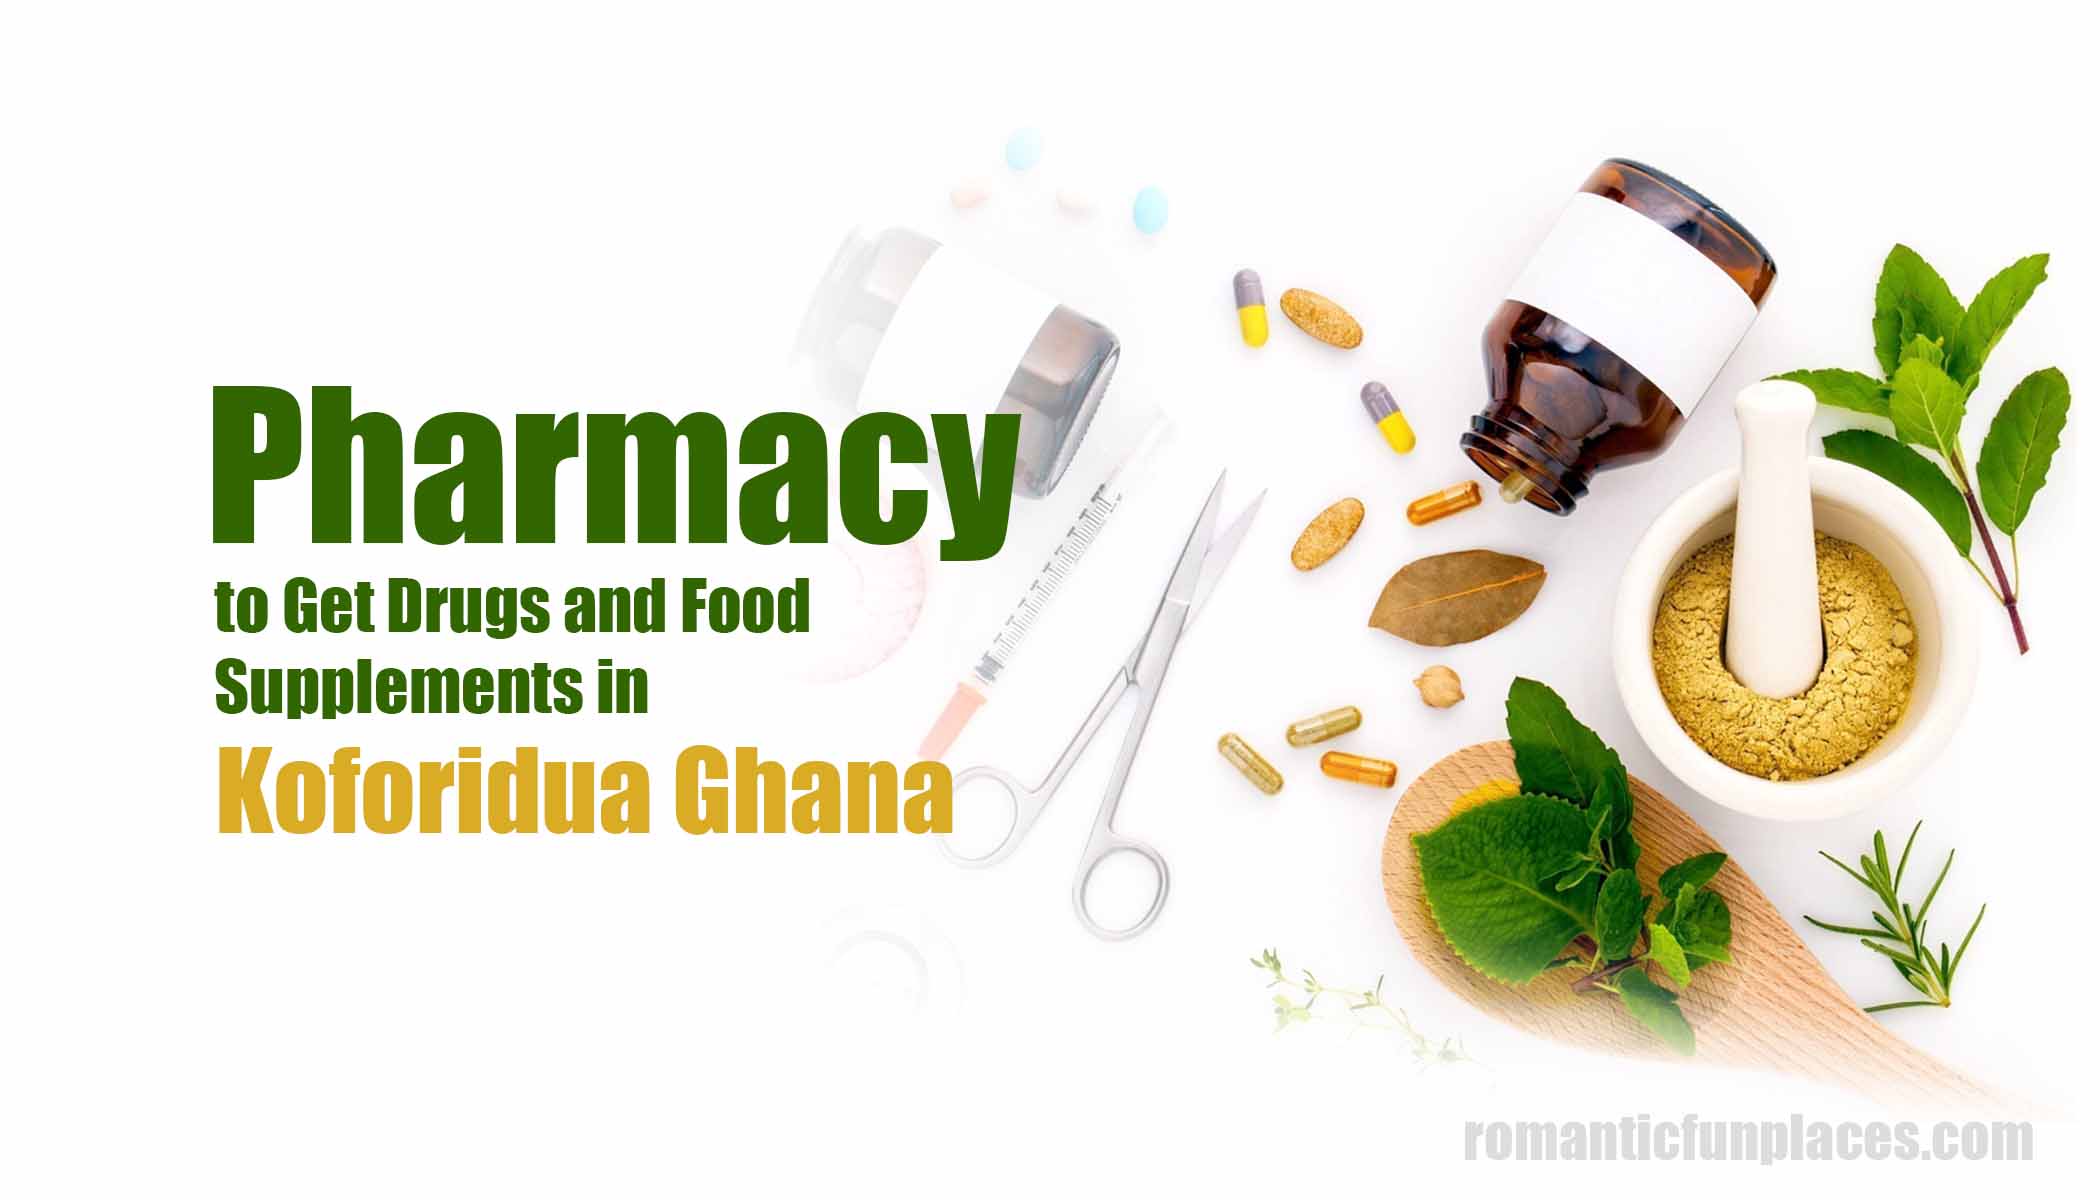 Pharmacy to Get Drugs and Food Supplements in Koforidua Ghana